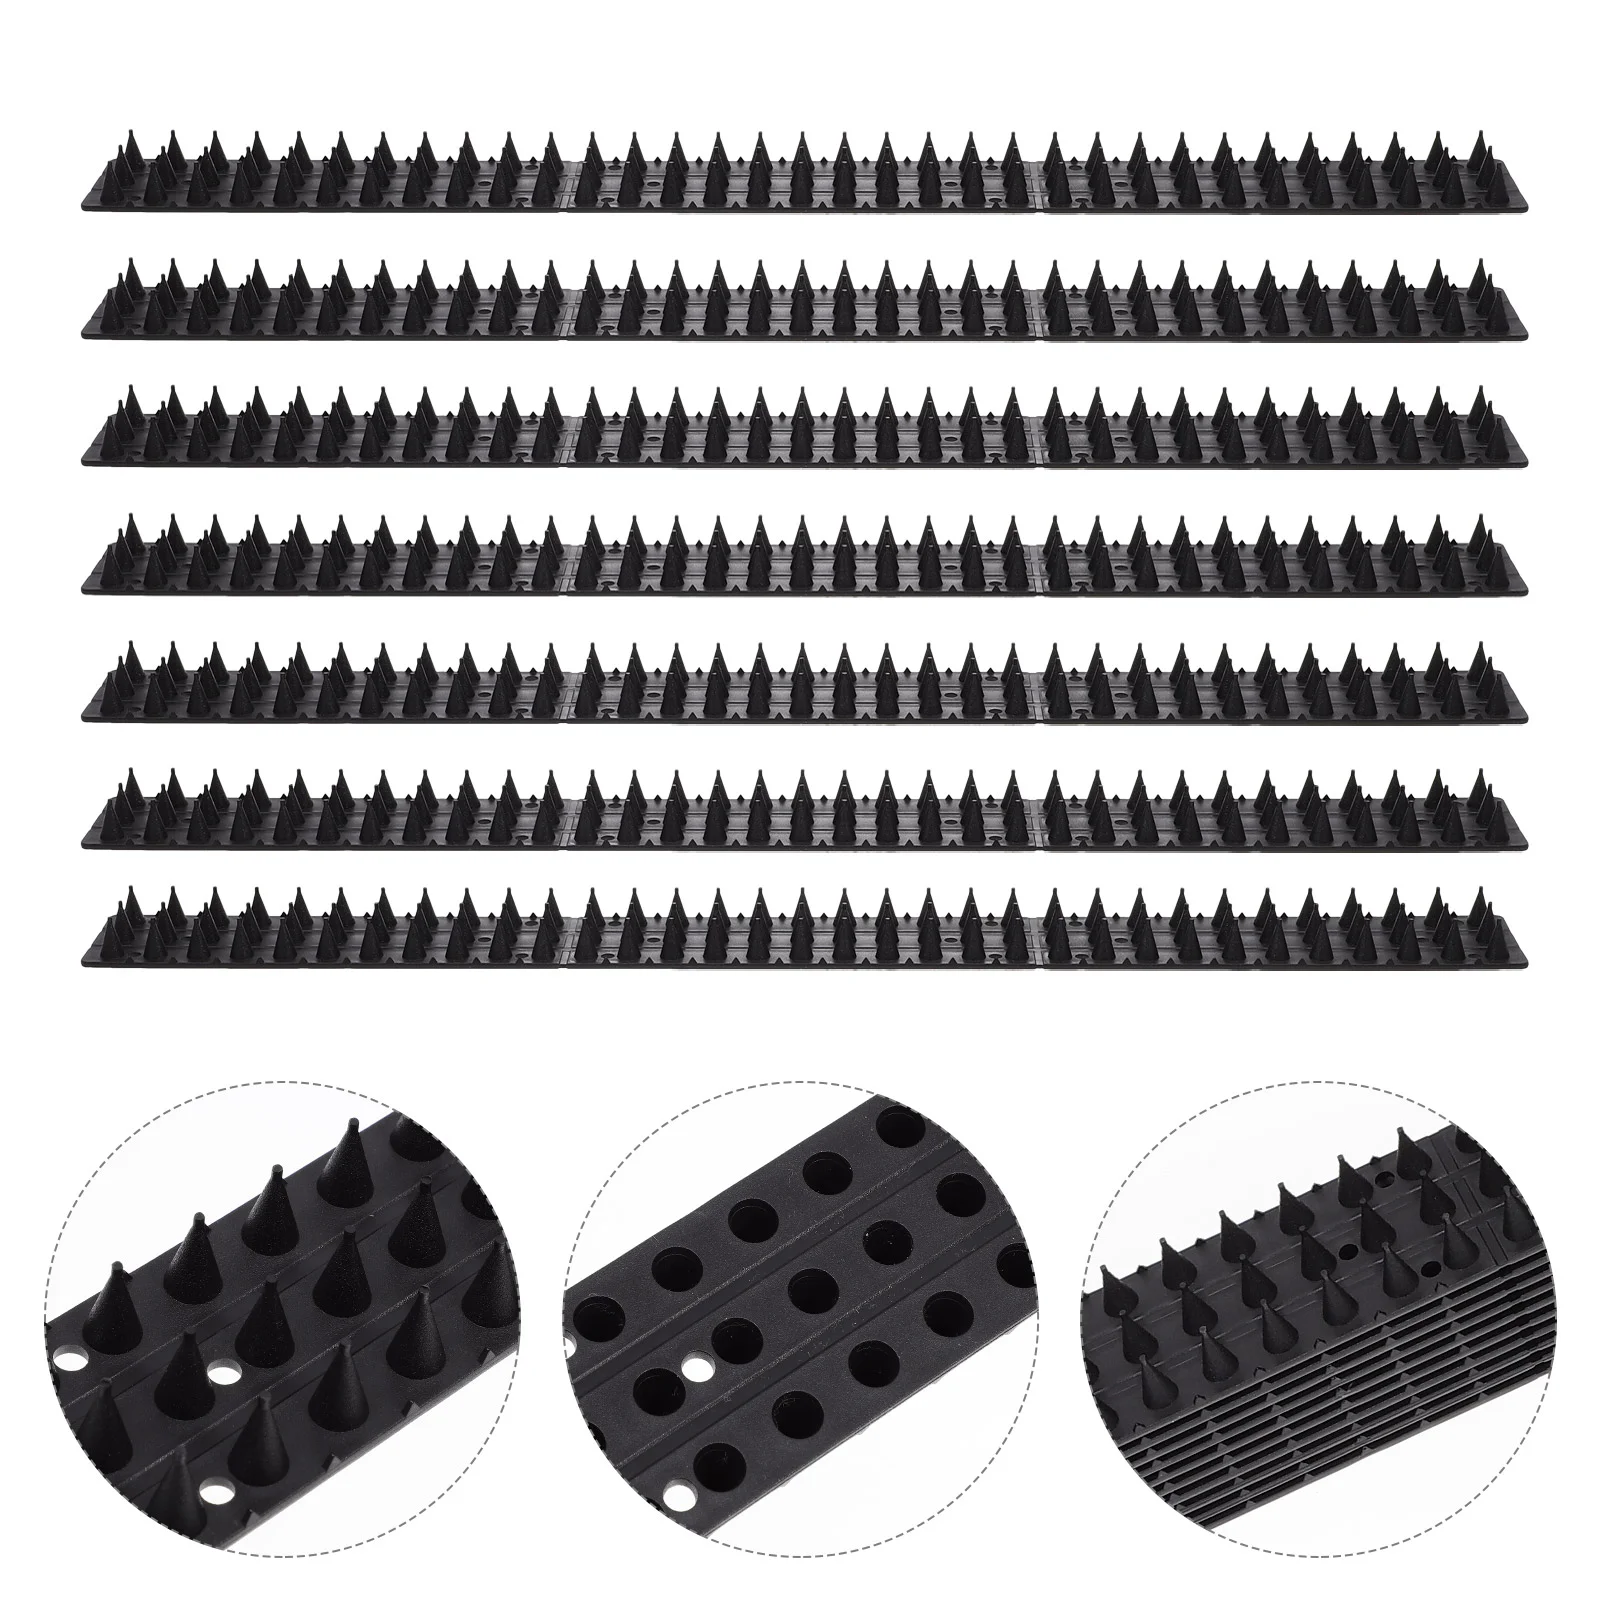 

10 Pcs Bird-repellent Spikes Plastic Cats Repellent Spikes Pigeon Prevention Spikes